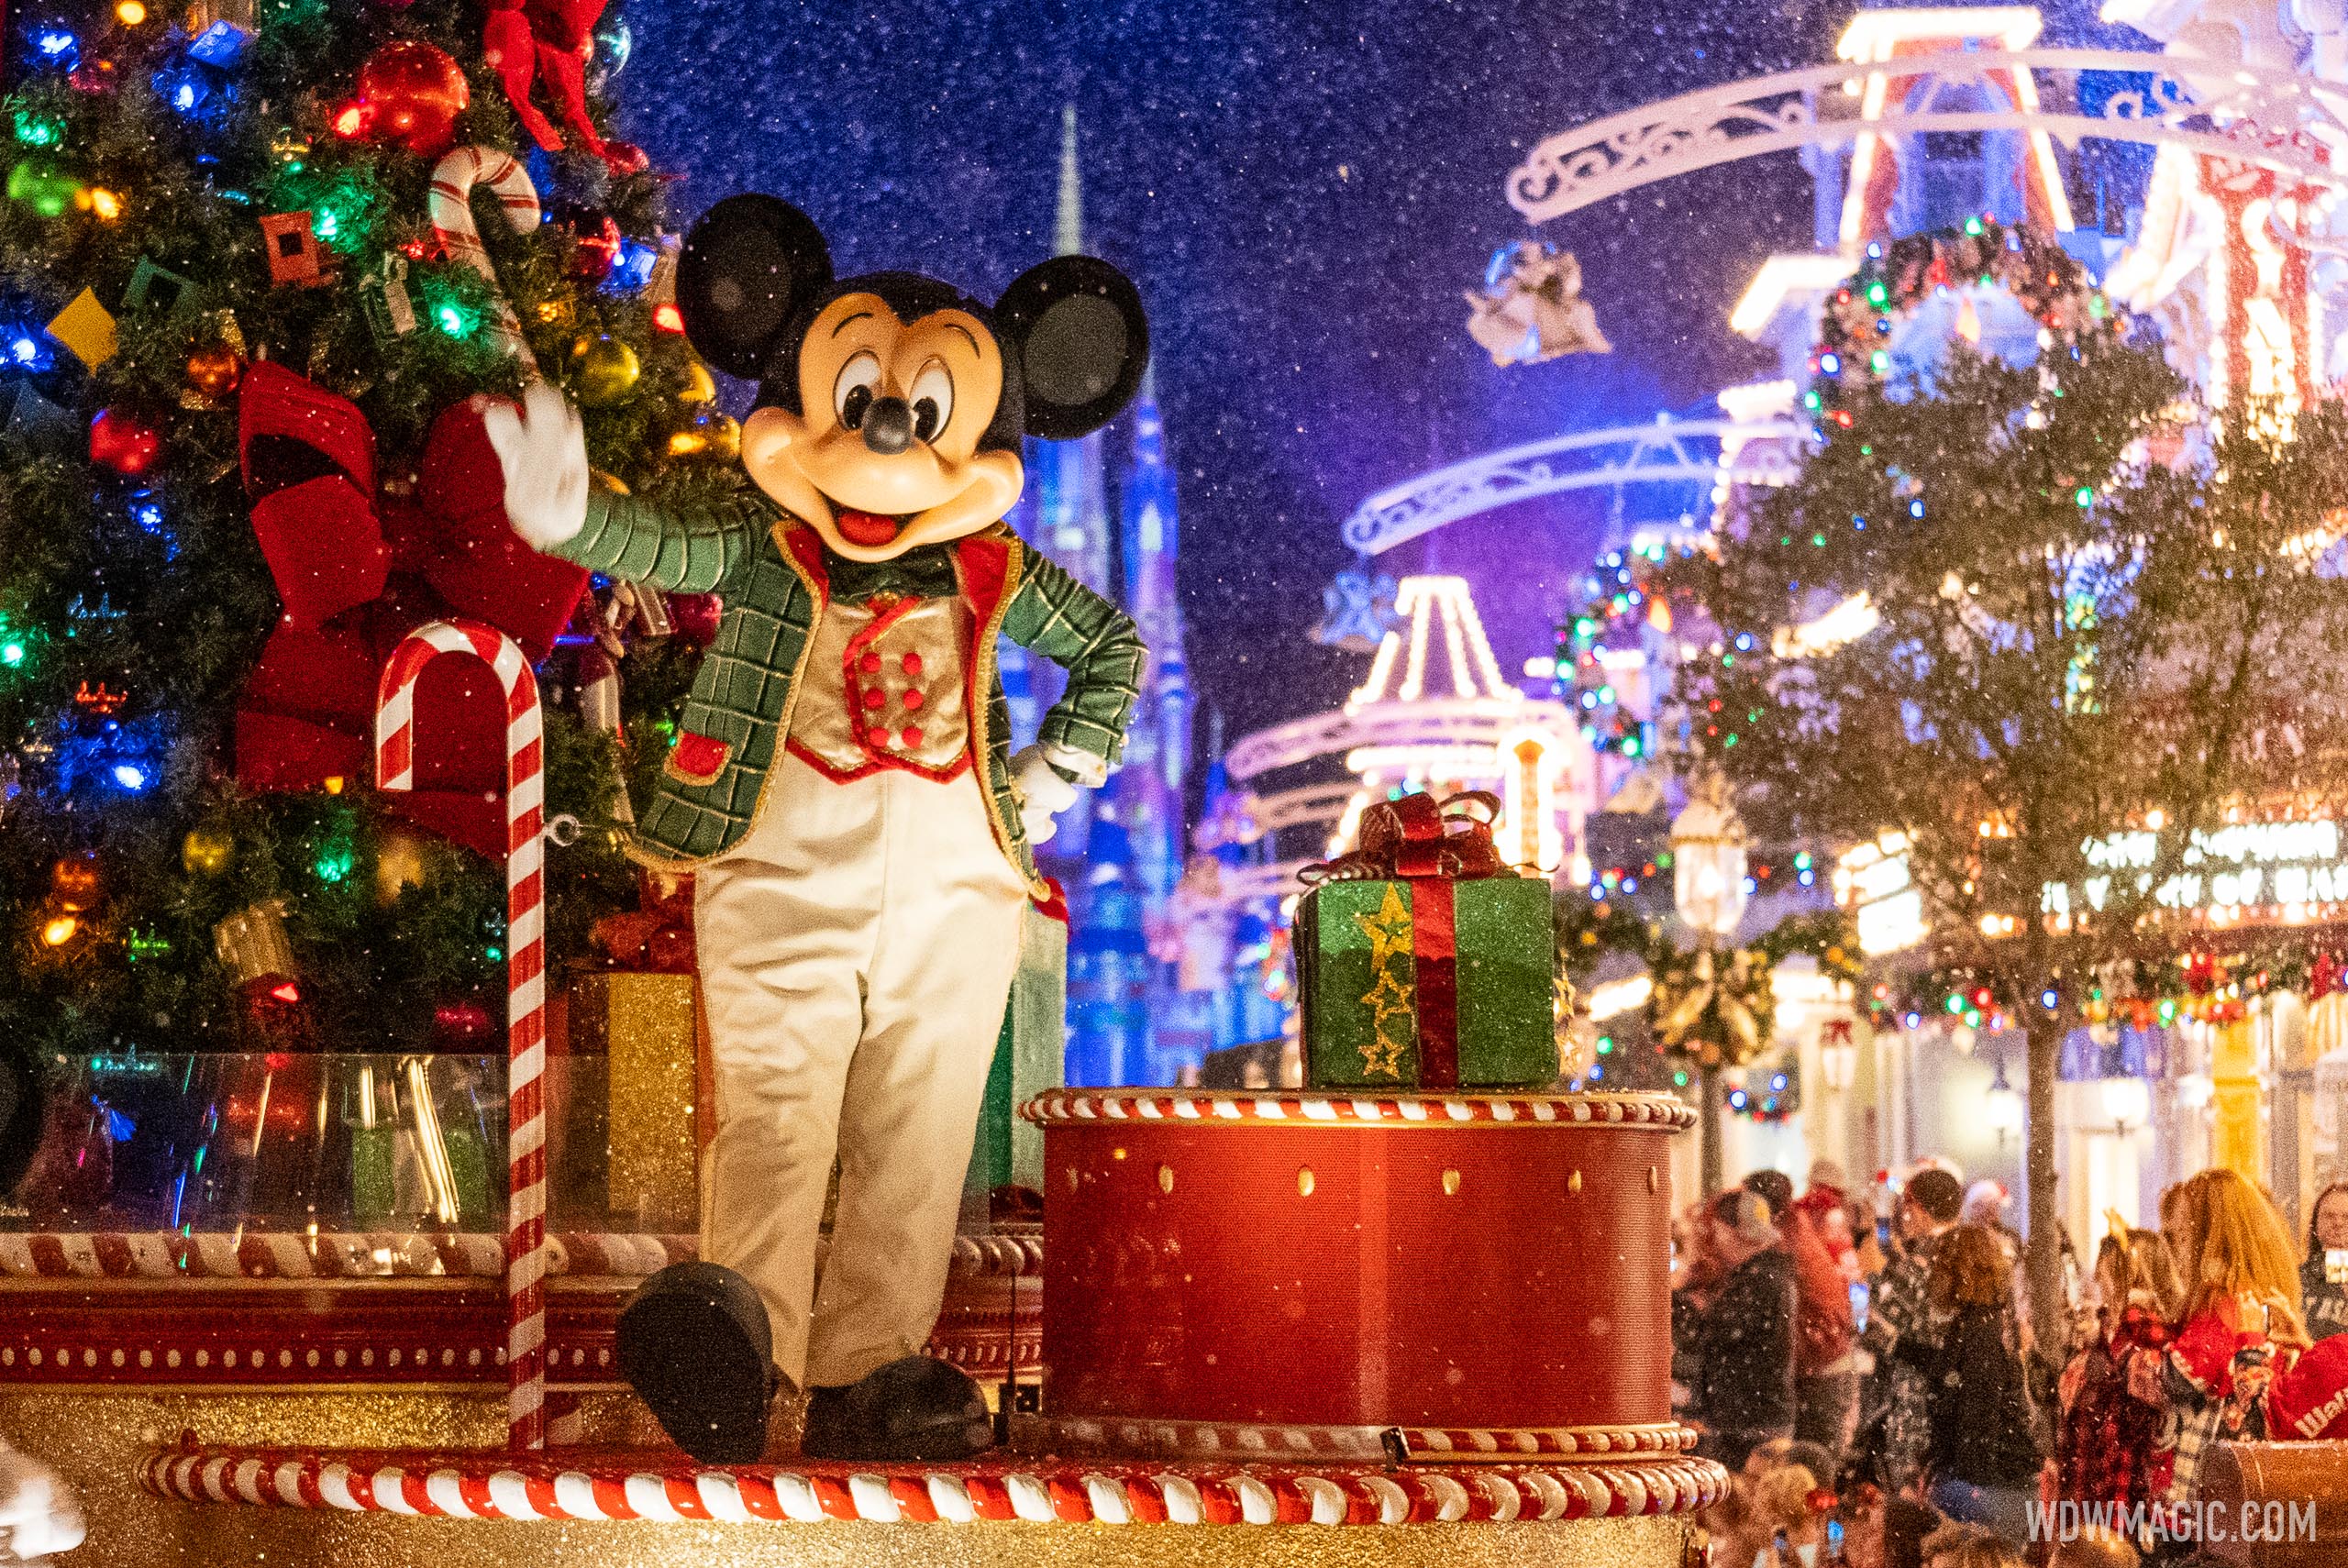 Magic Kingdom's 'Mickey's Once Upon a Christmastime Parade' joins ...